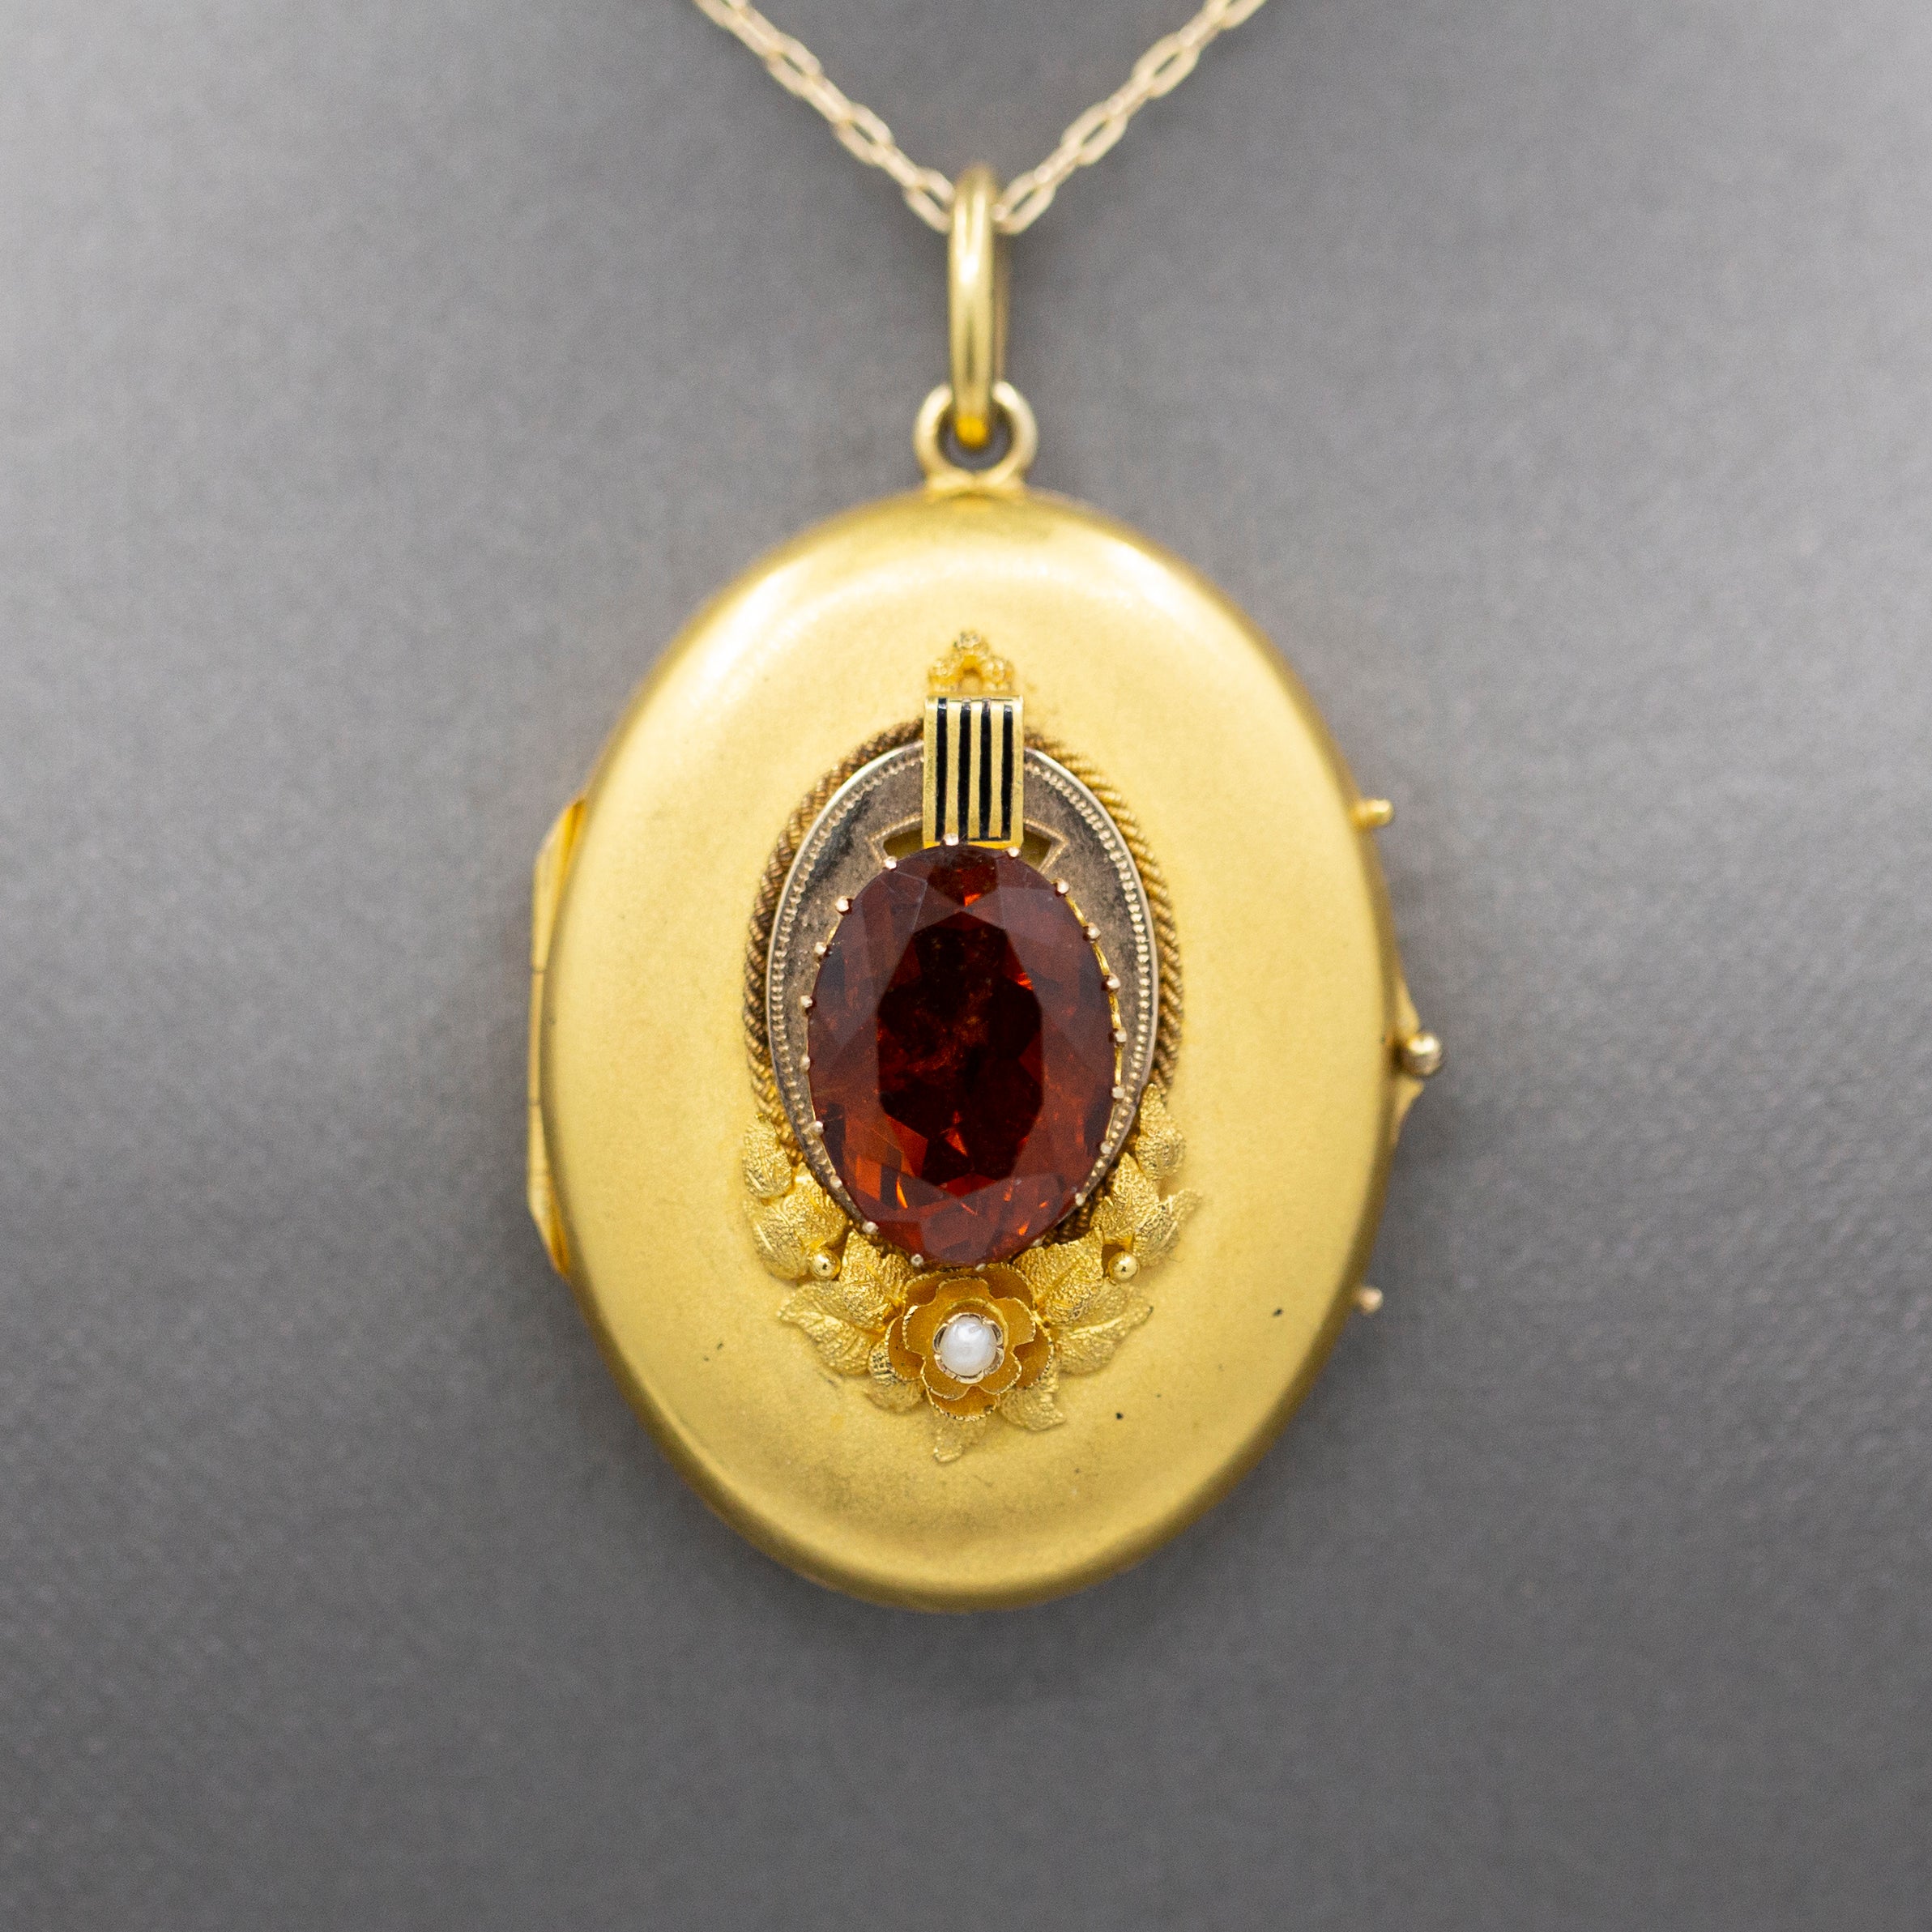 Exquisite Art Nouveau Madeira Citrine and Seed Pearl Large Locket in 14k Yellow Gold